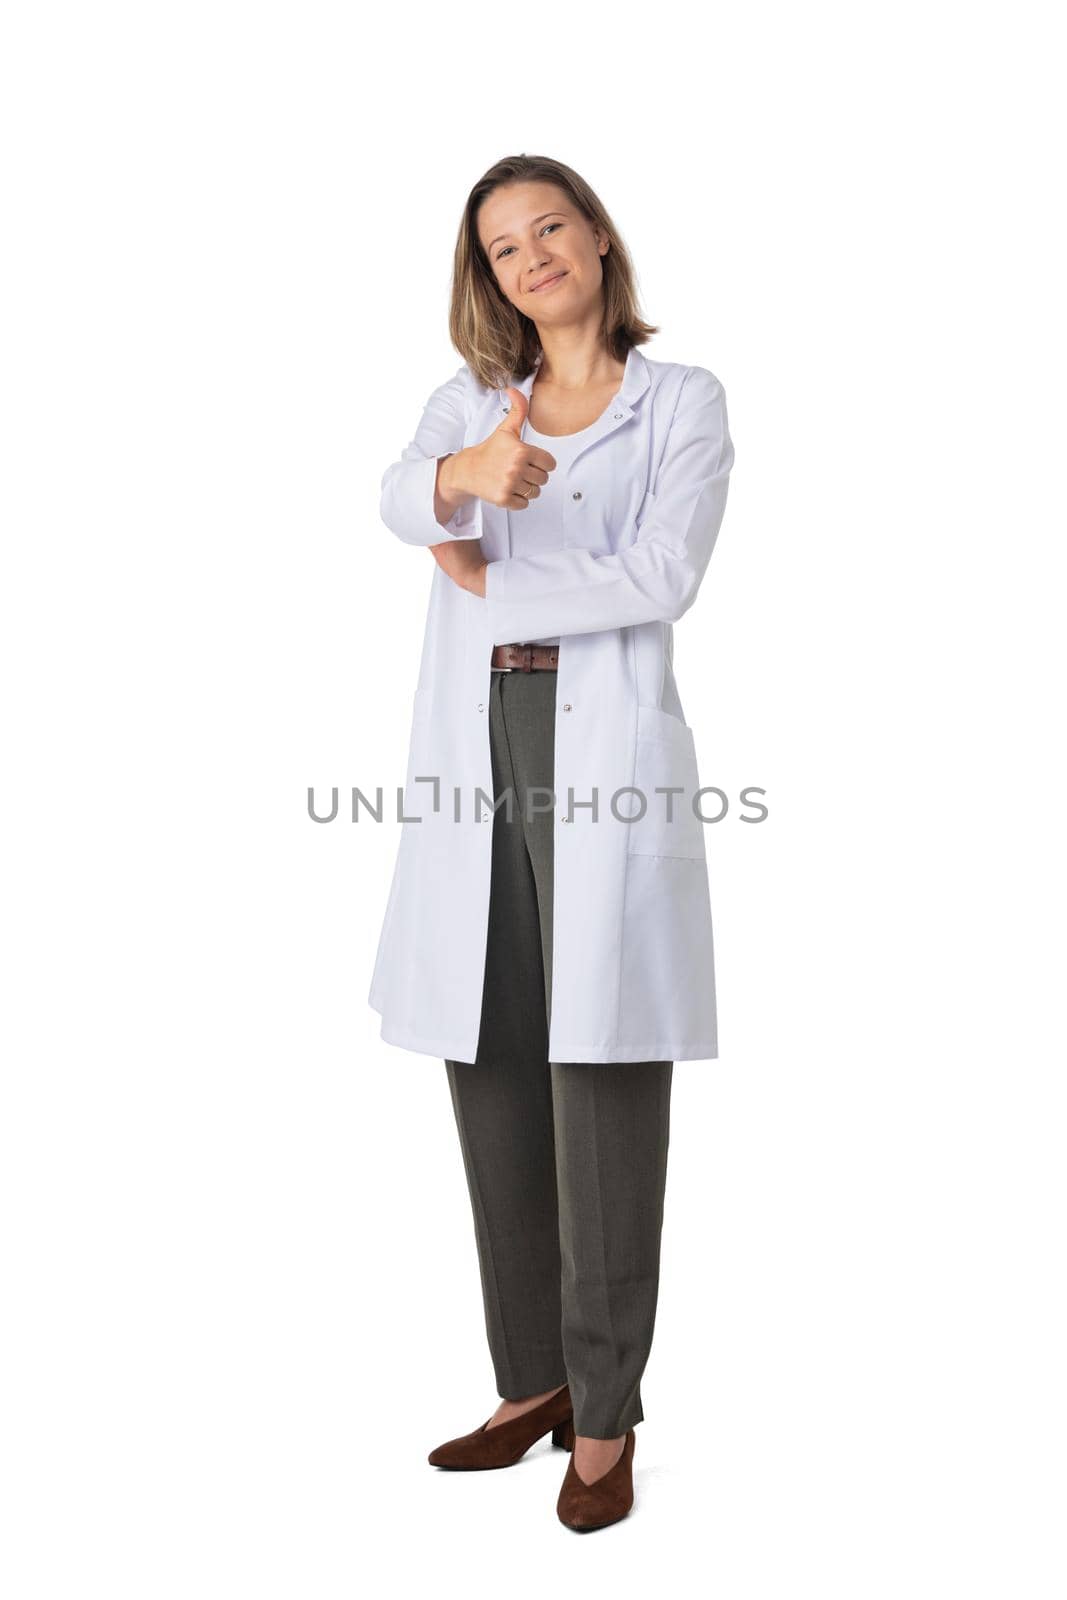 Doctor woman posing in a studio with thumb up isolated on white background